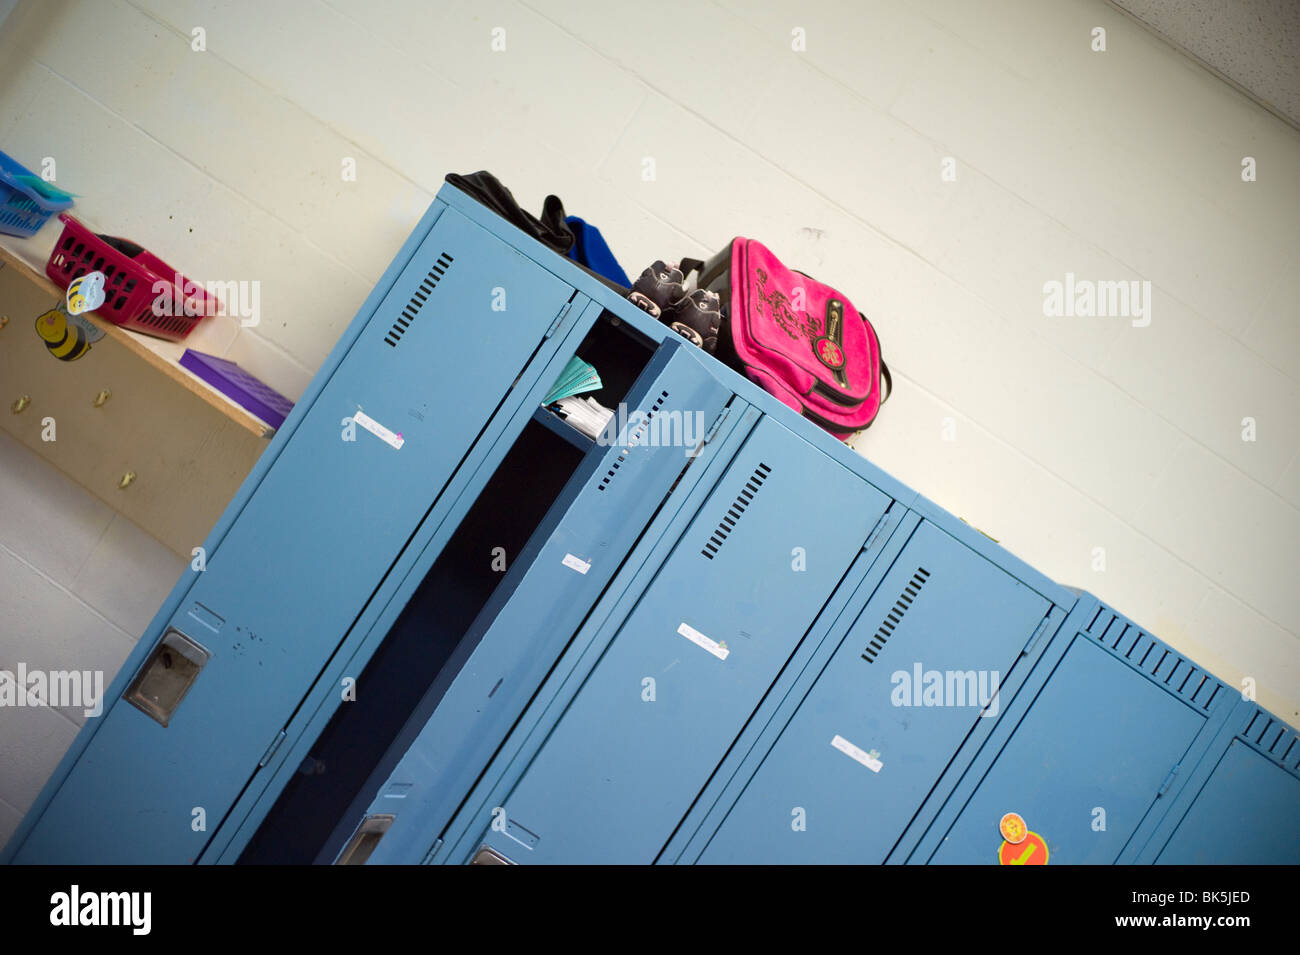 School lockers with stickers and magnets Stock Photo